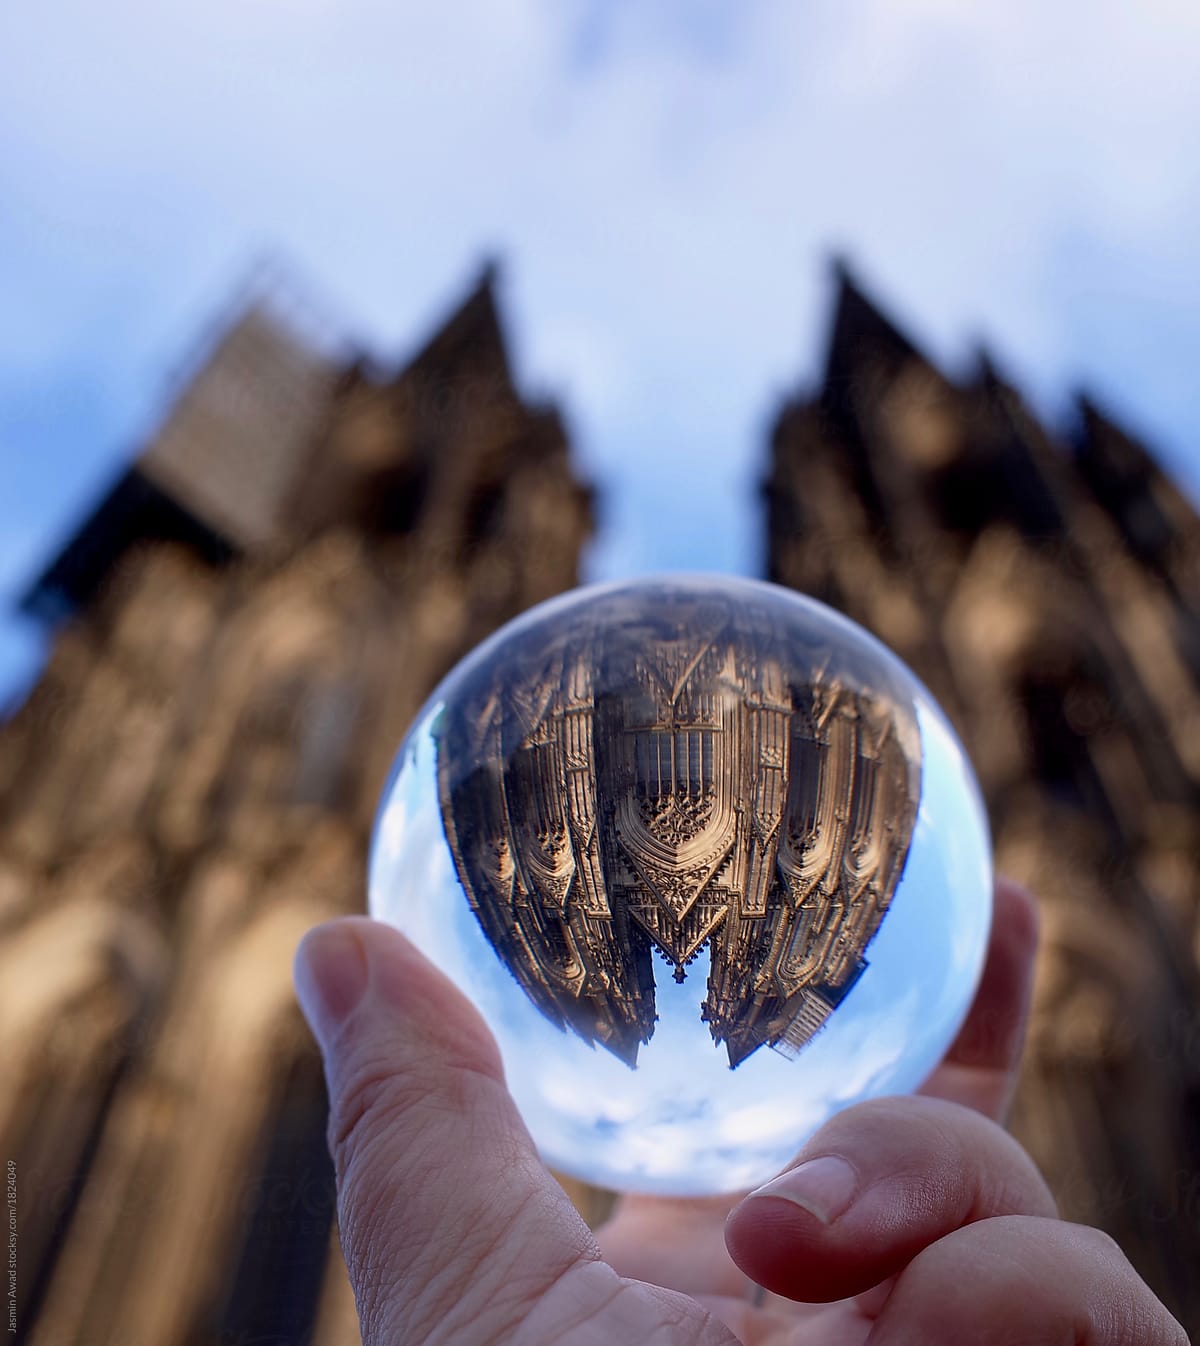 Cologne Cathedral reflected upside down in glass sphere